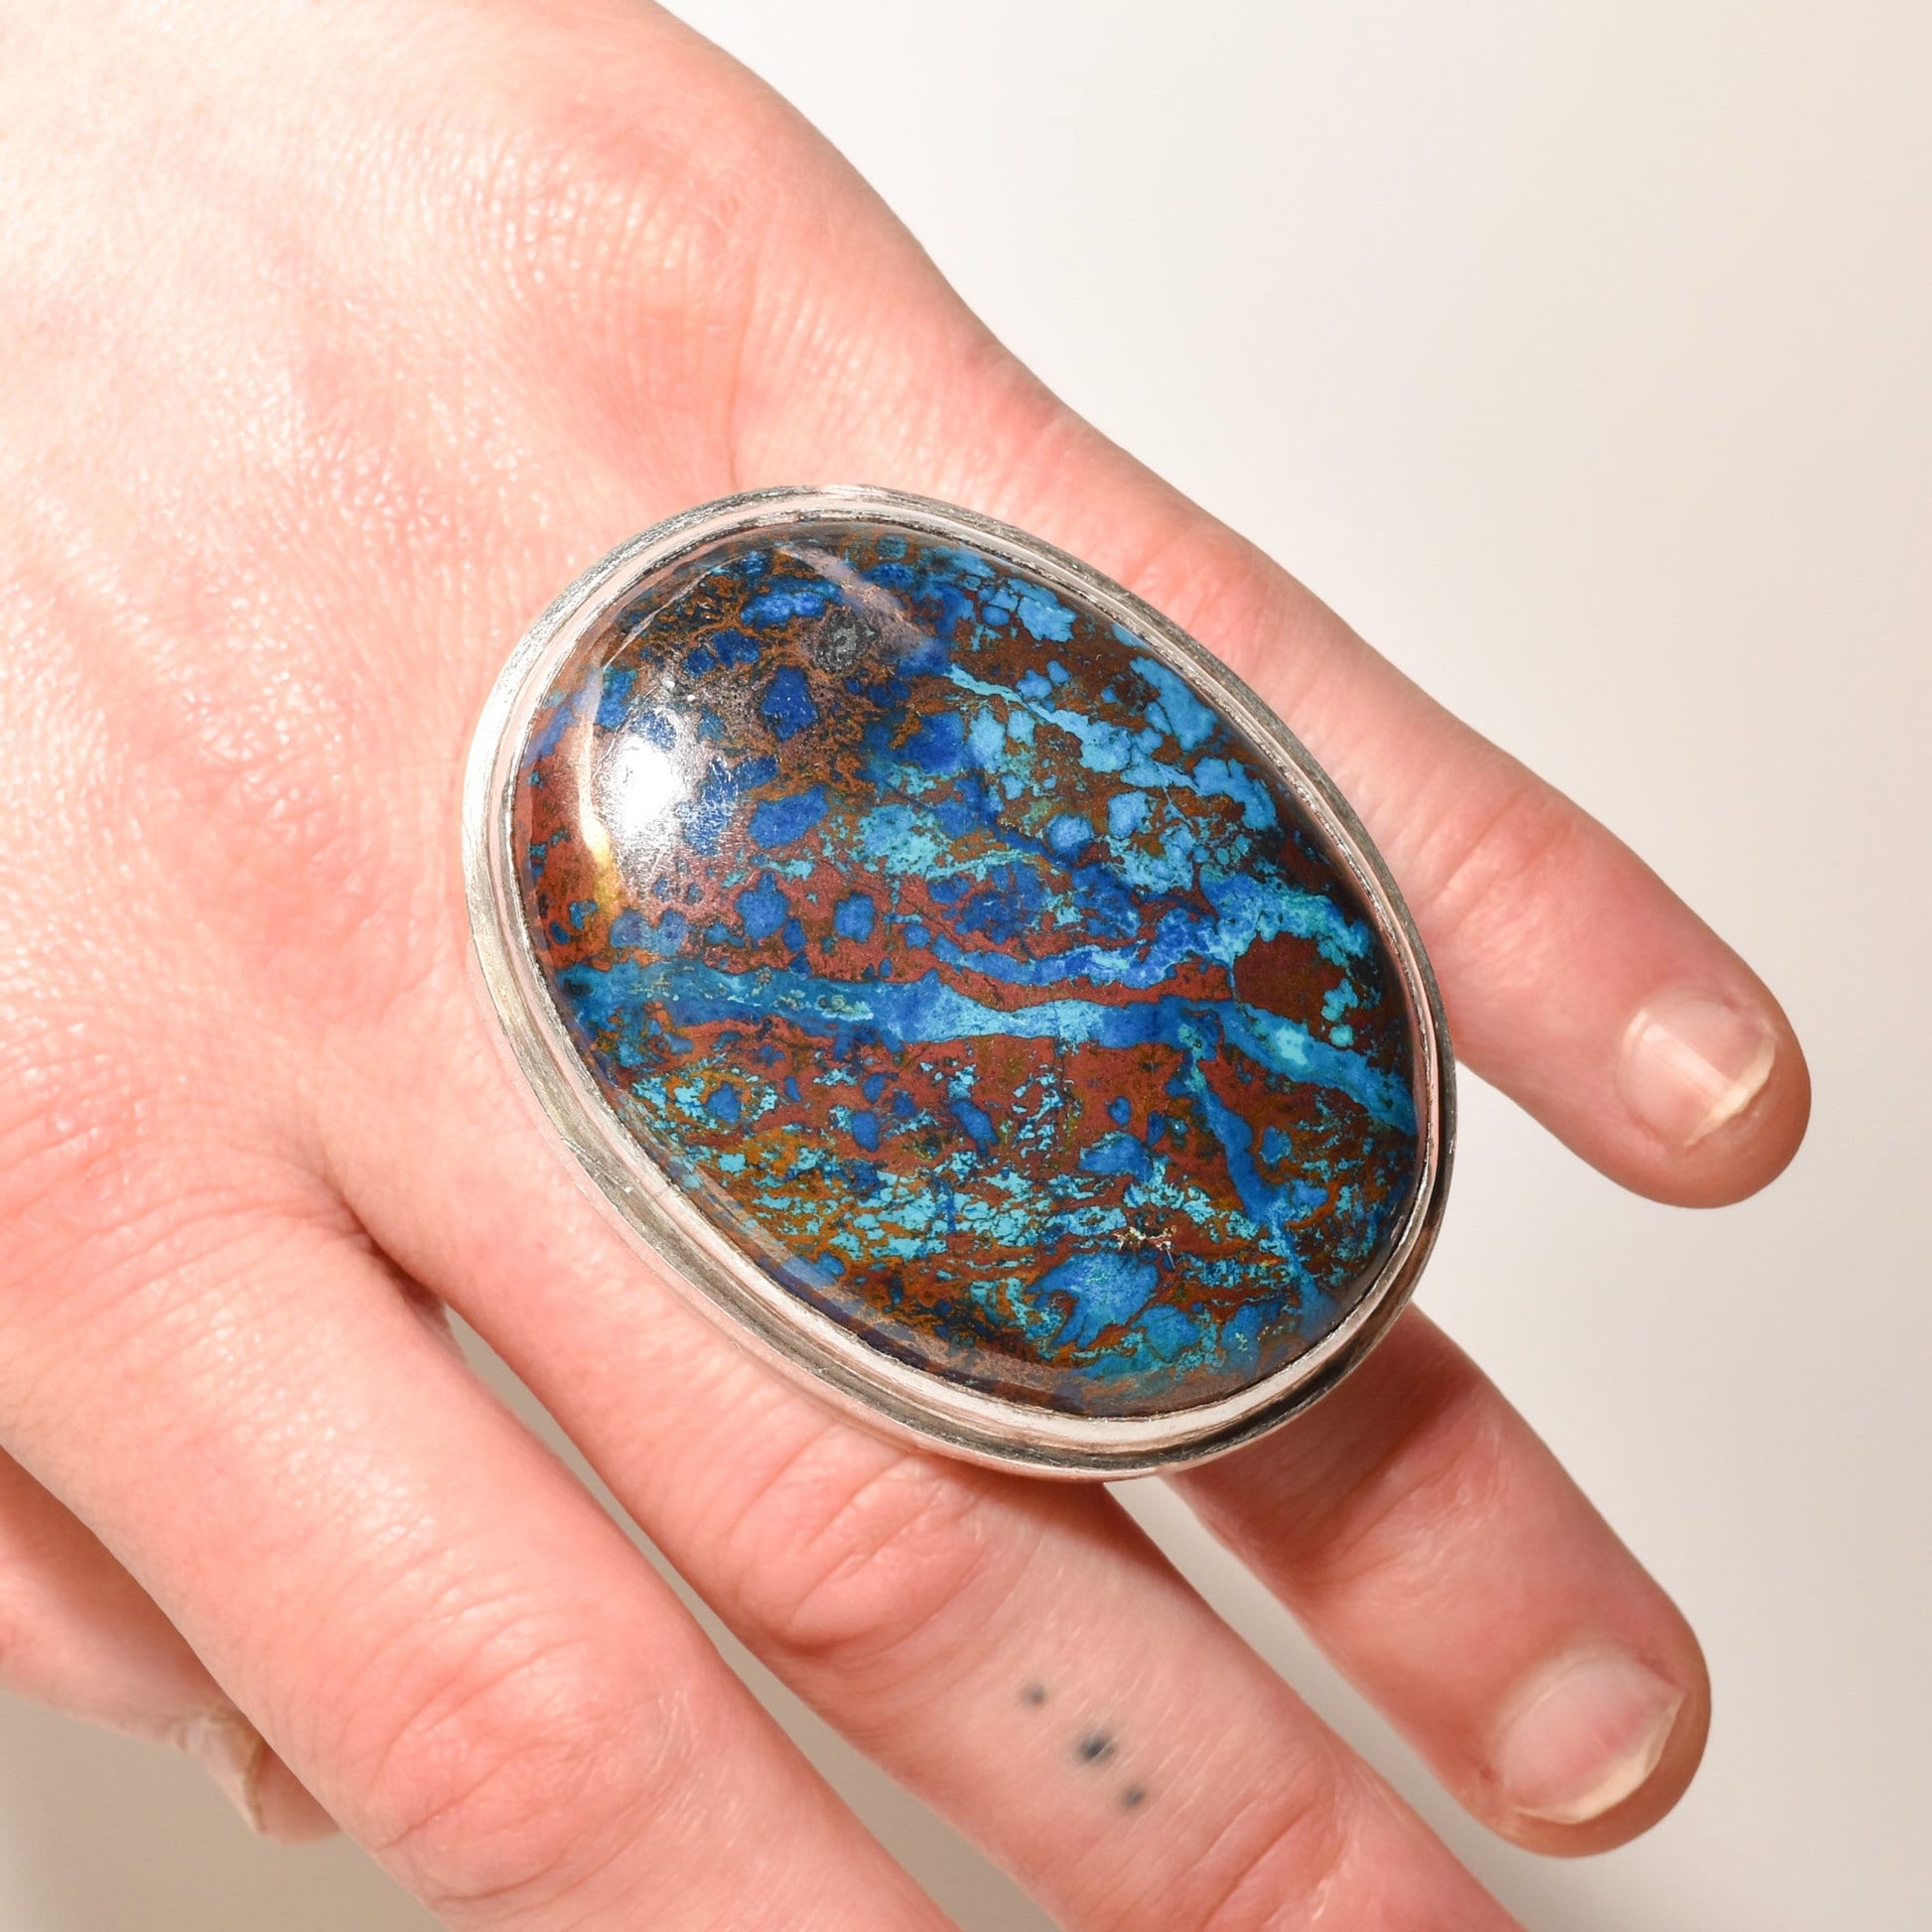 Huge sterling silver cabochon statement ring with chunky blue matrix gemstone on a hand, size 7 3/4 US.